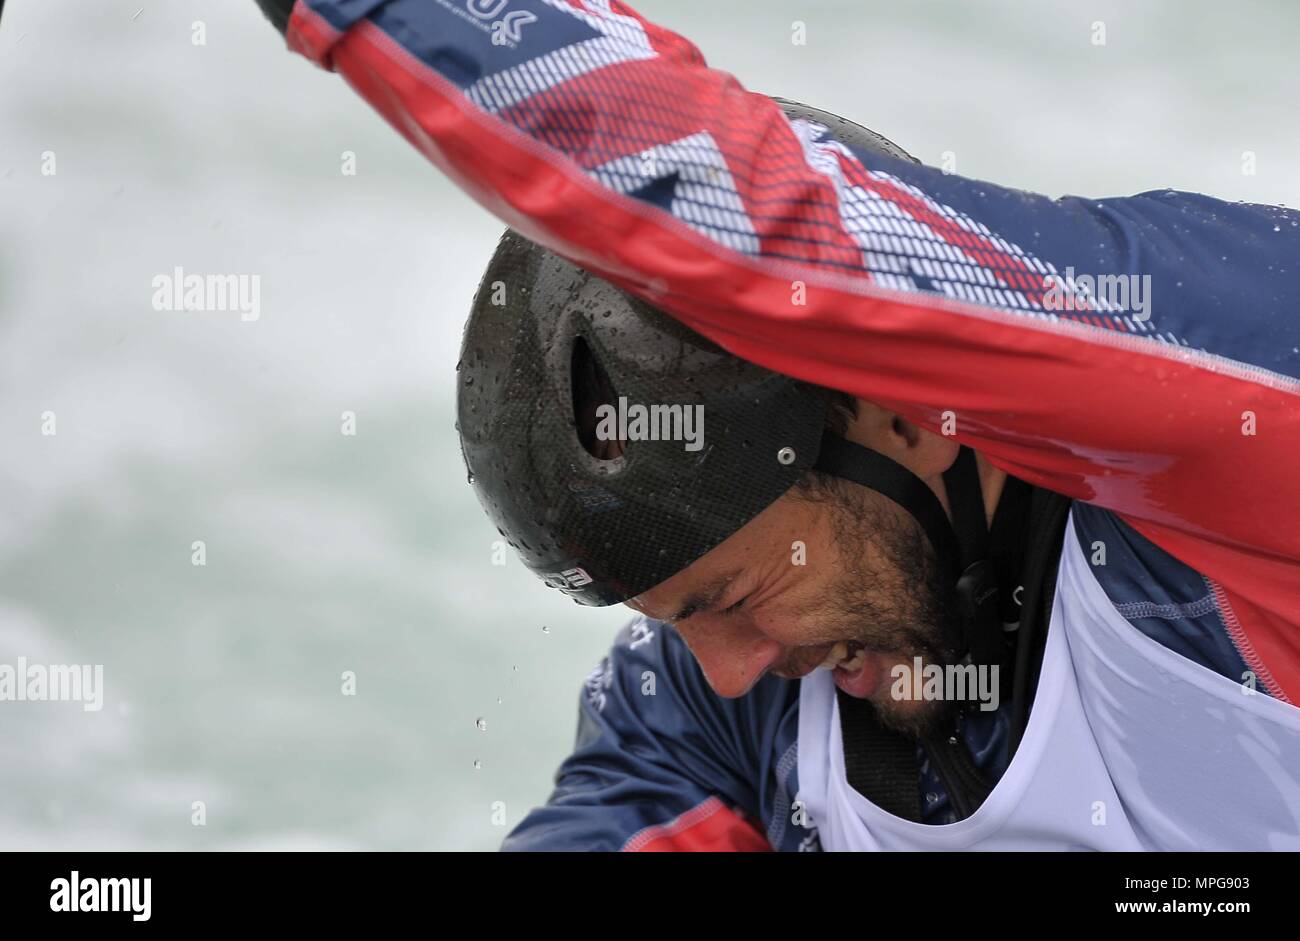 Waltham Cross, Hertfordshire, UK. 23rd May 2018. Ryan Westley (2015 World Bronze medallist C1M) during race simulations. Canoe Slalom media day prior to the start of the 2018 international season. Lee Valley White Water Centre. Waltham Cross. Hertfordshire. UK. 23/05/2018. Credit: Sport In Pictures/Alamy Live News Credit: Sport In Pictures/Alamy Live News Stock Photo